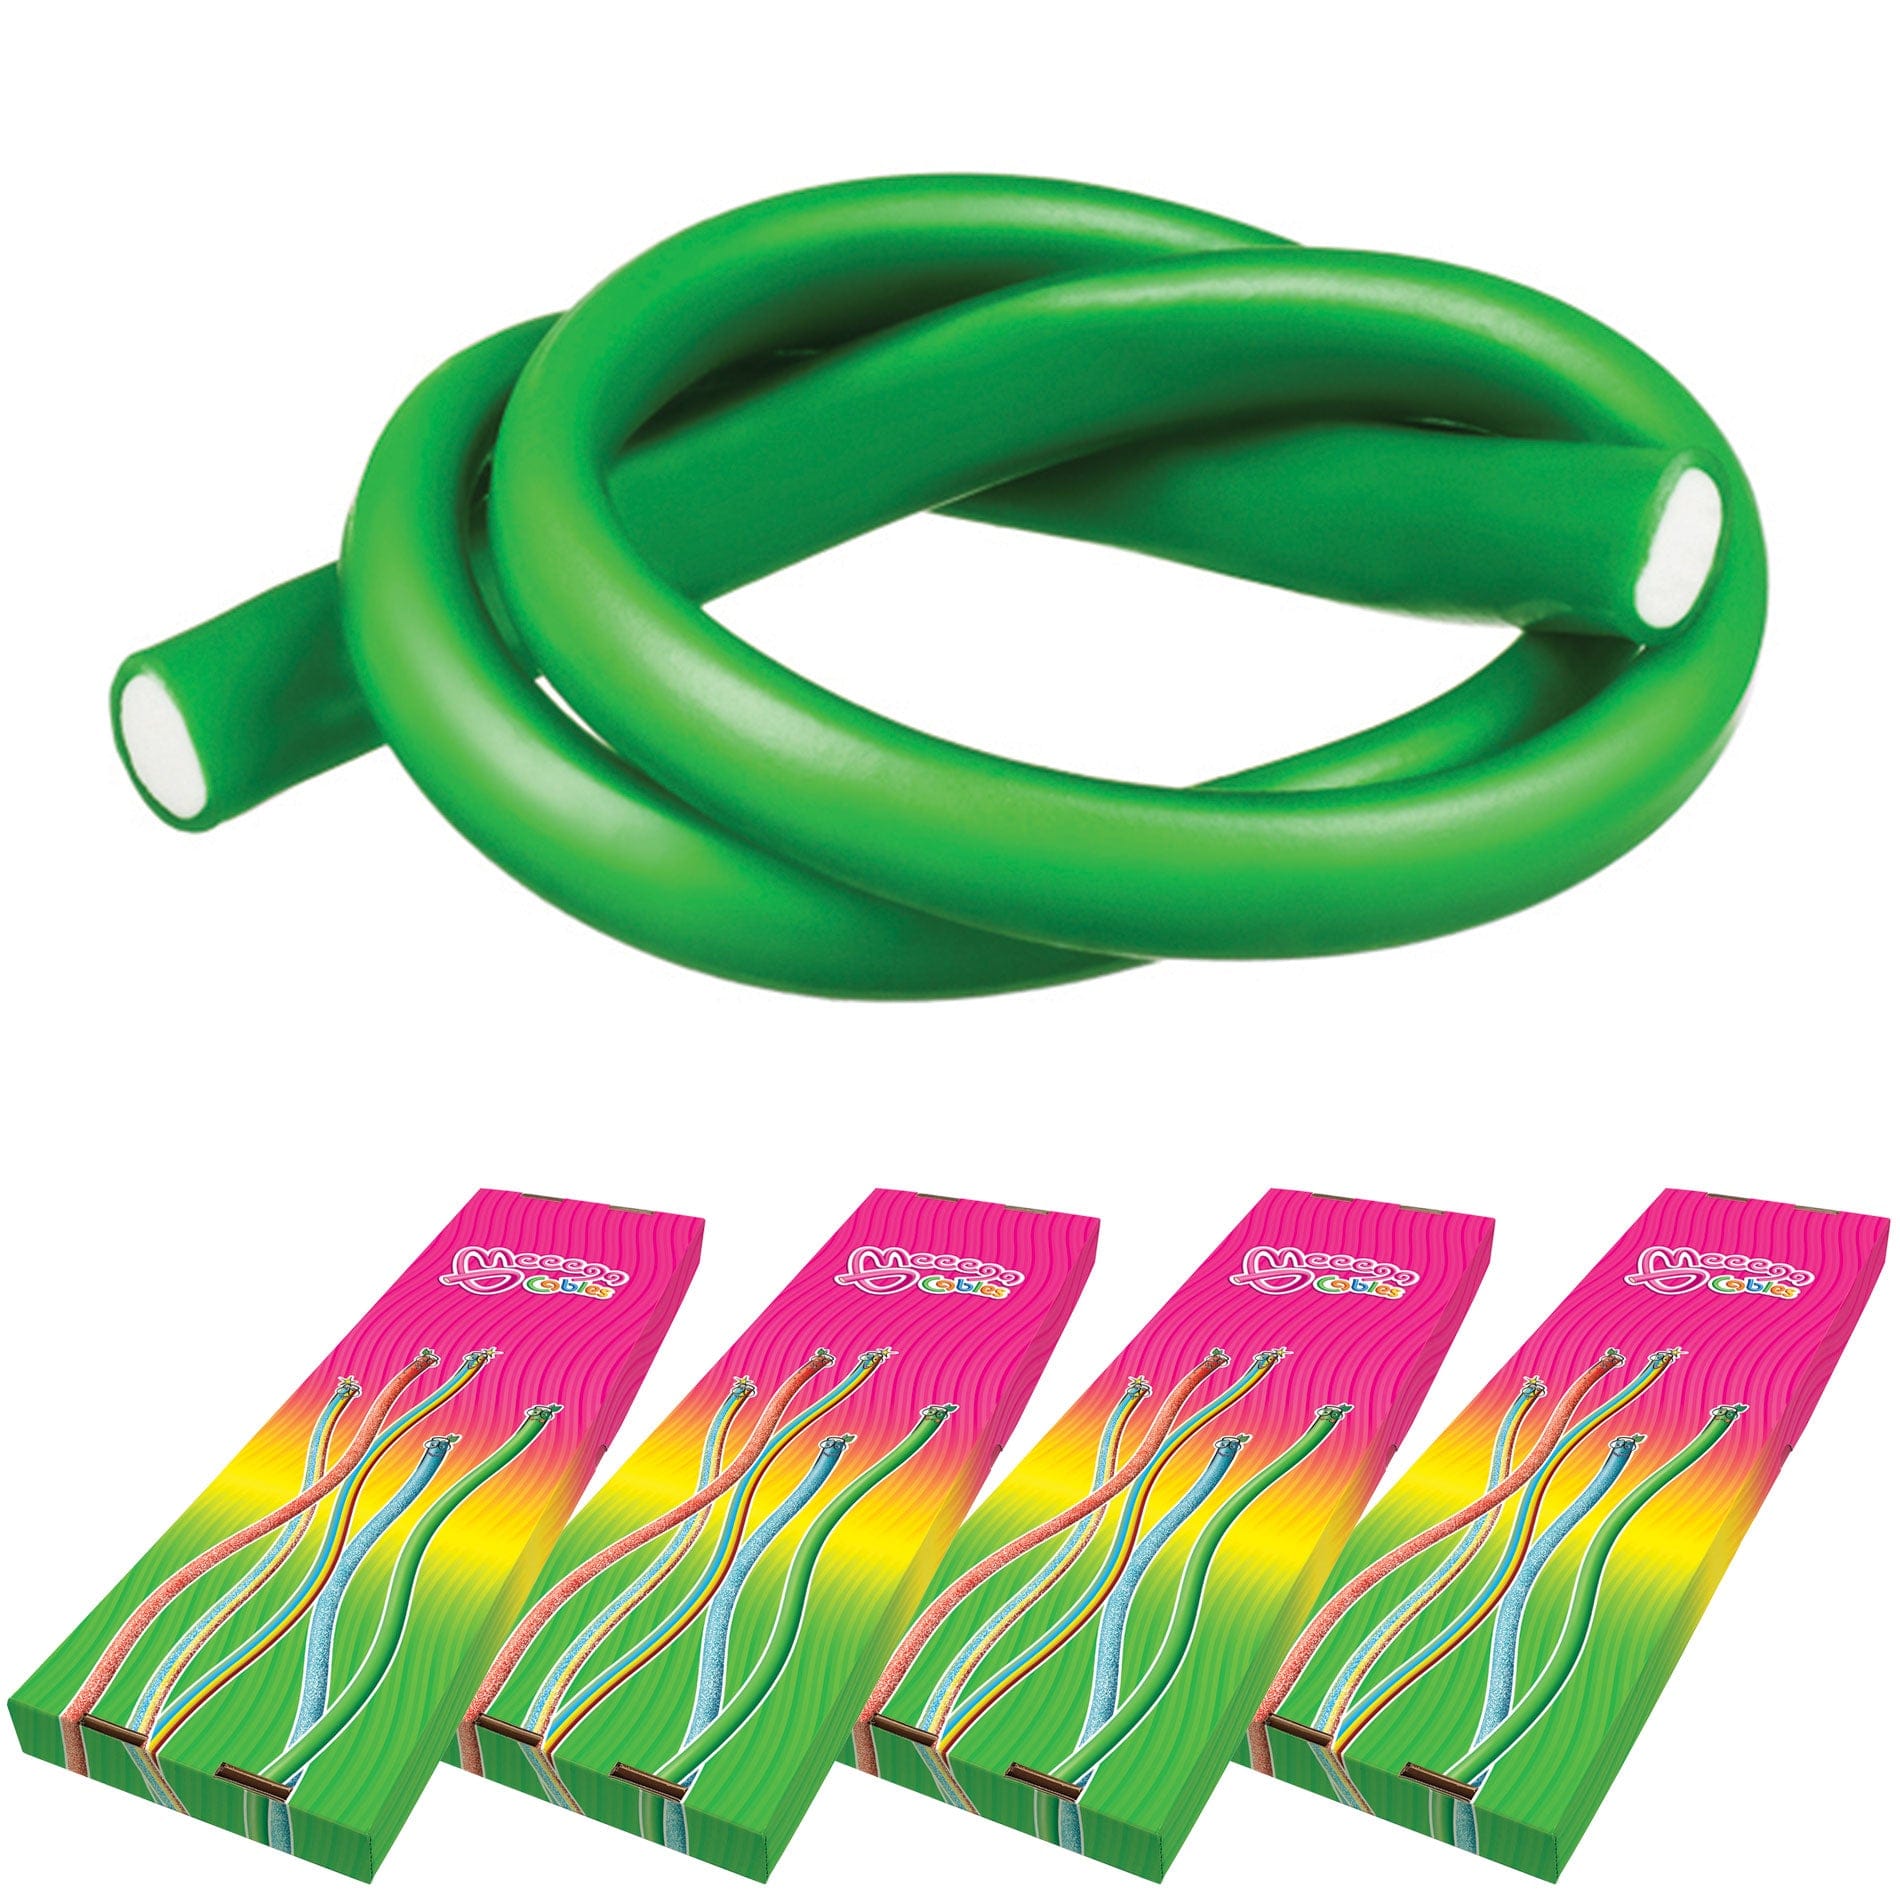 Novelty Concessions Gummy Rope APPLE / 4 Pack (120 pieces) Meeega Cables European Chewy Rope Candy - Box of 30 individually wrapped Meeega Cables, each over 2-feet long cups with lids and straws